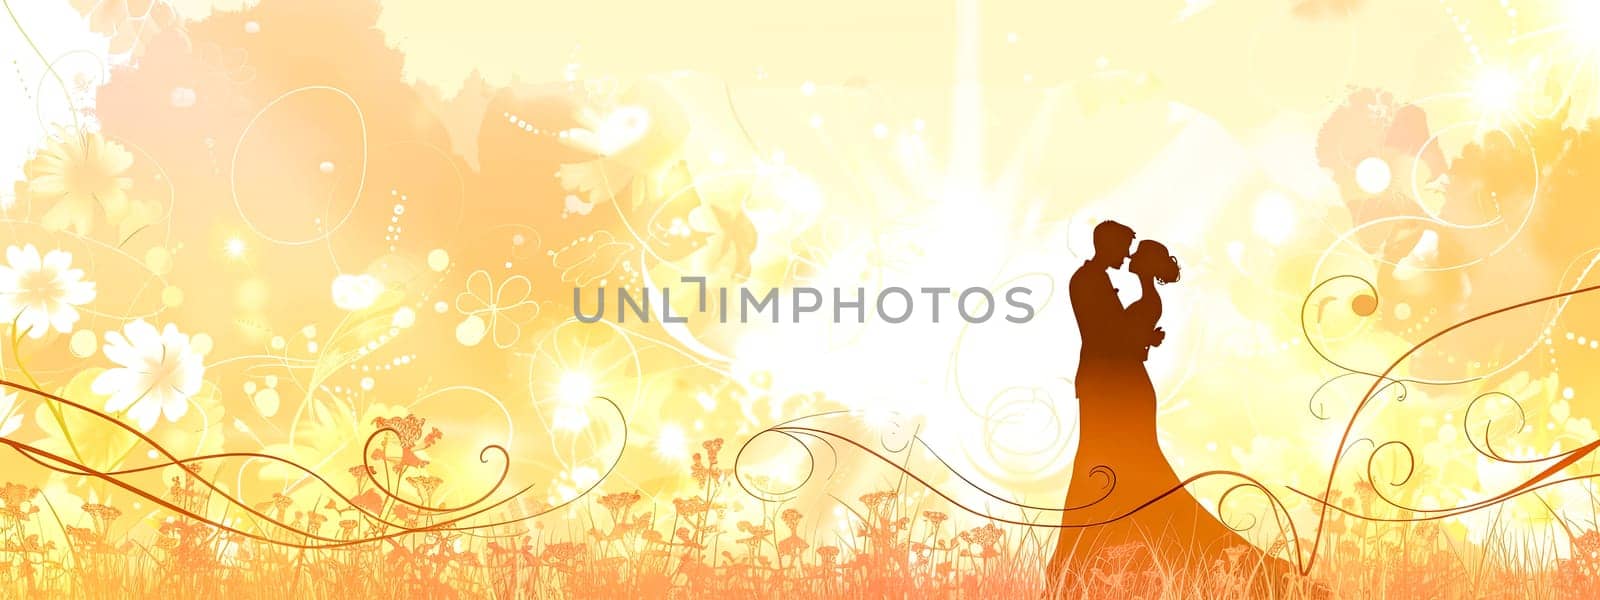 A couple in love embraces in a field of vibrant flowers under a clear blue sky, surrounded by the beauty of natures warm hues and artistic landscape